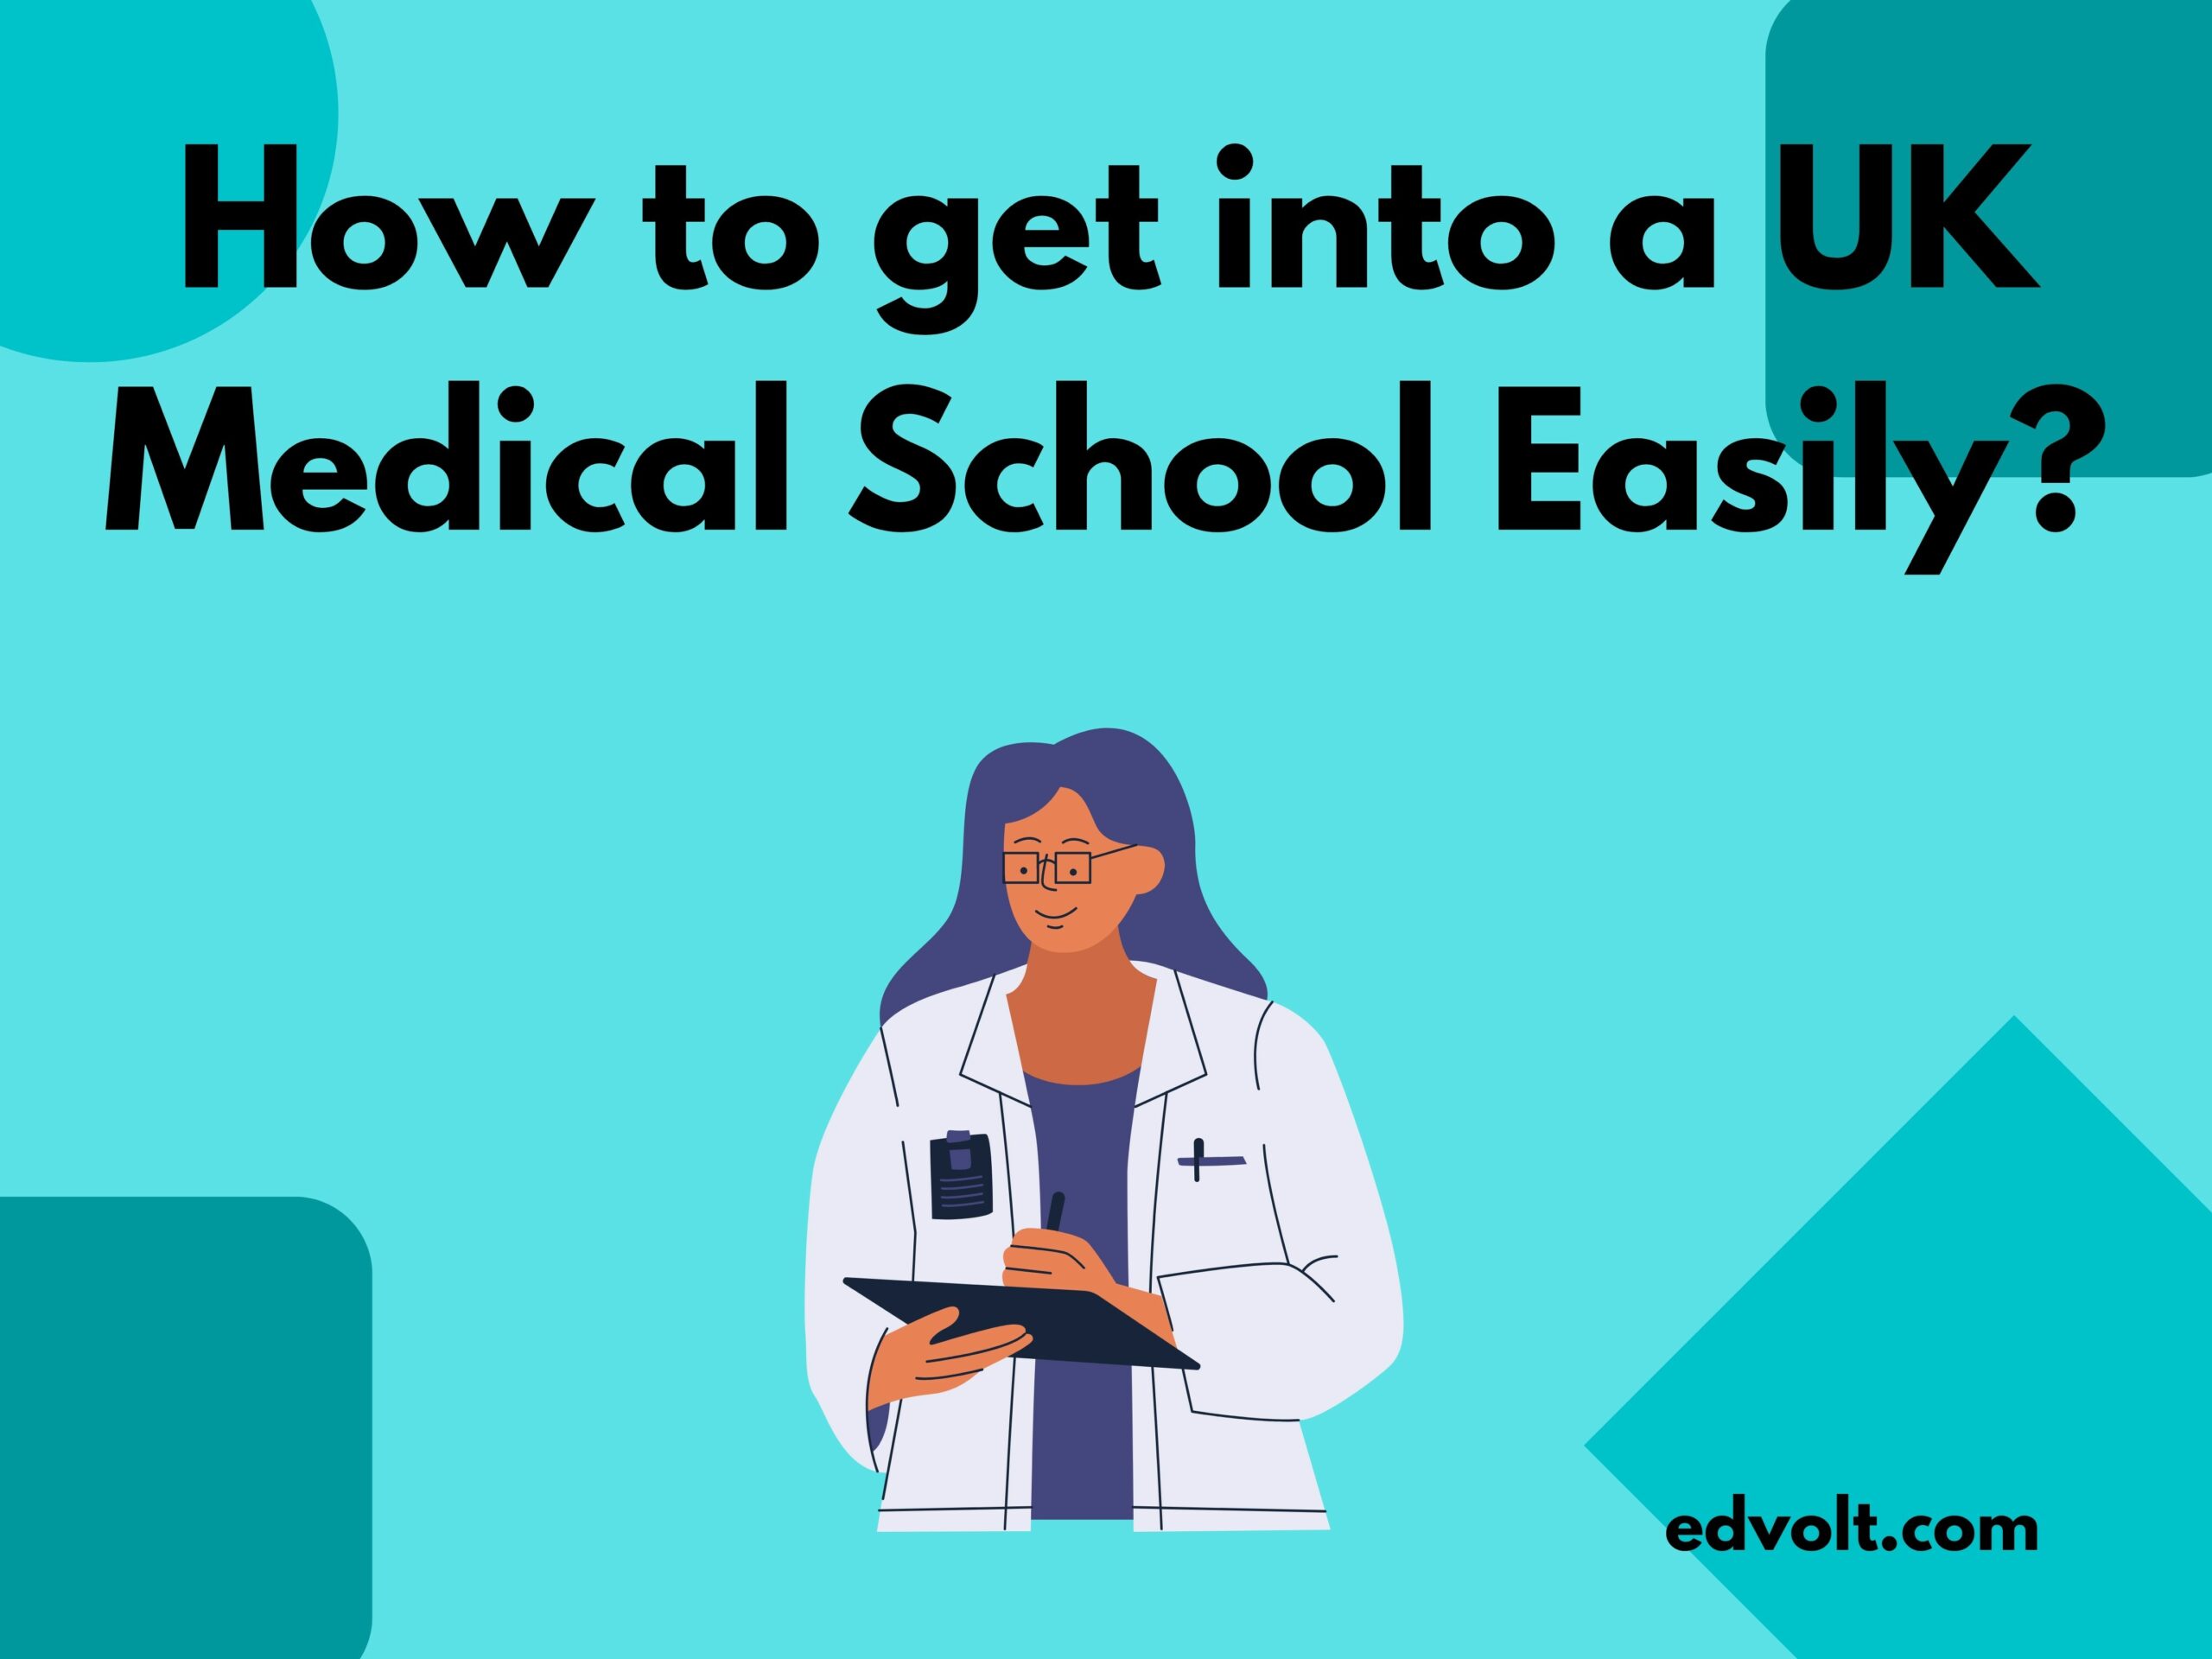 get into a UK Medical School Easily